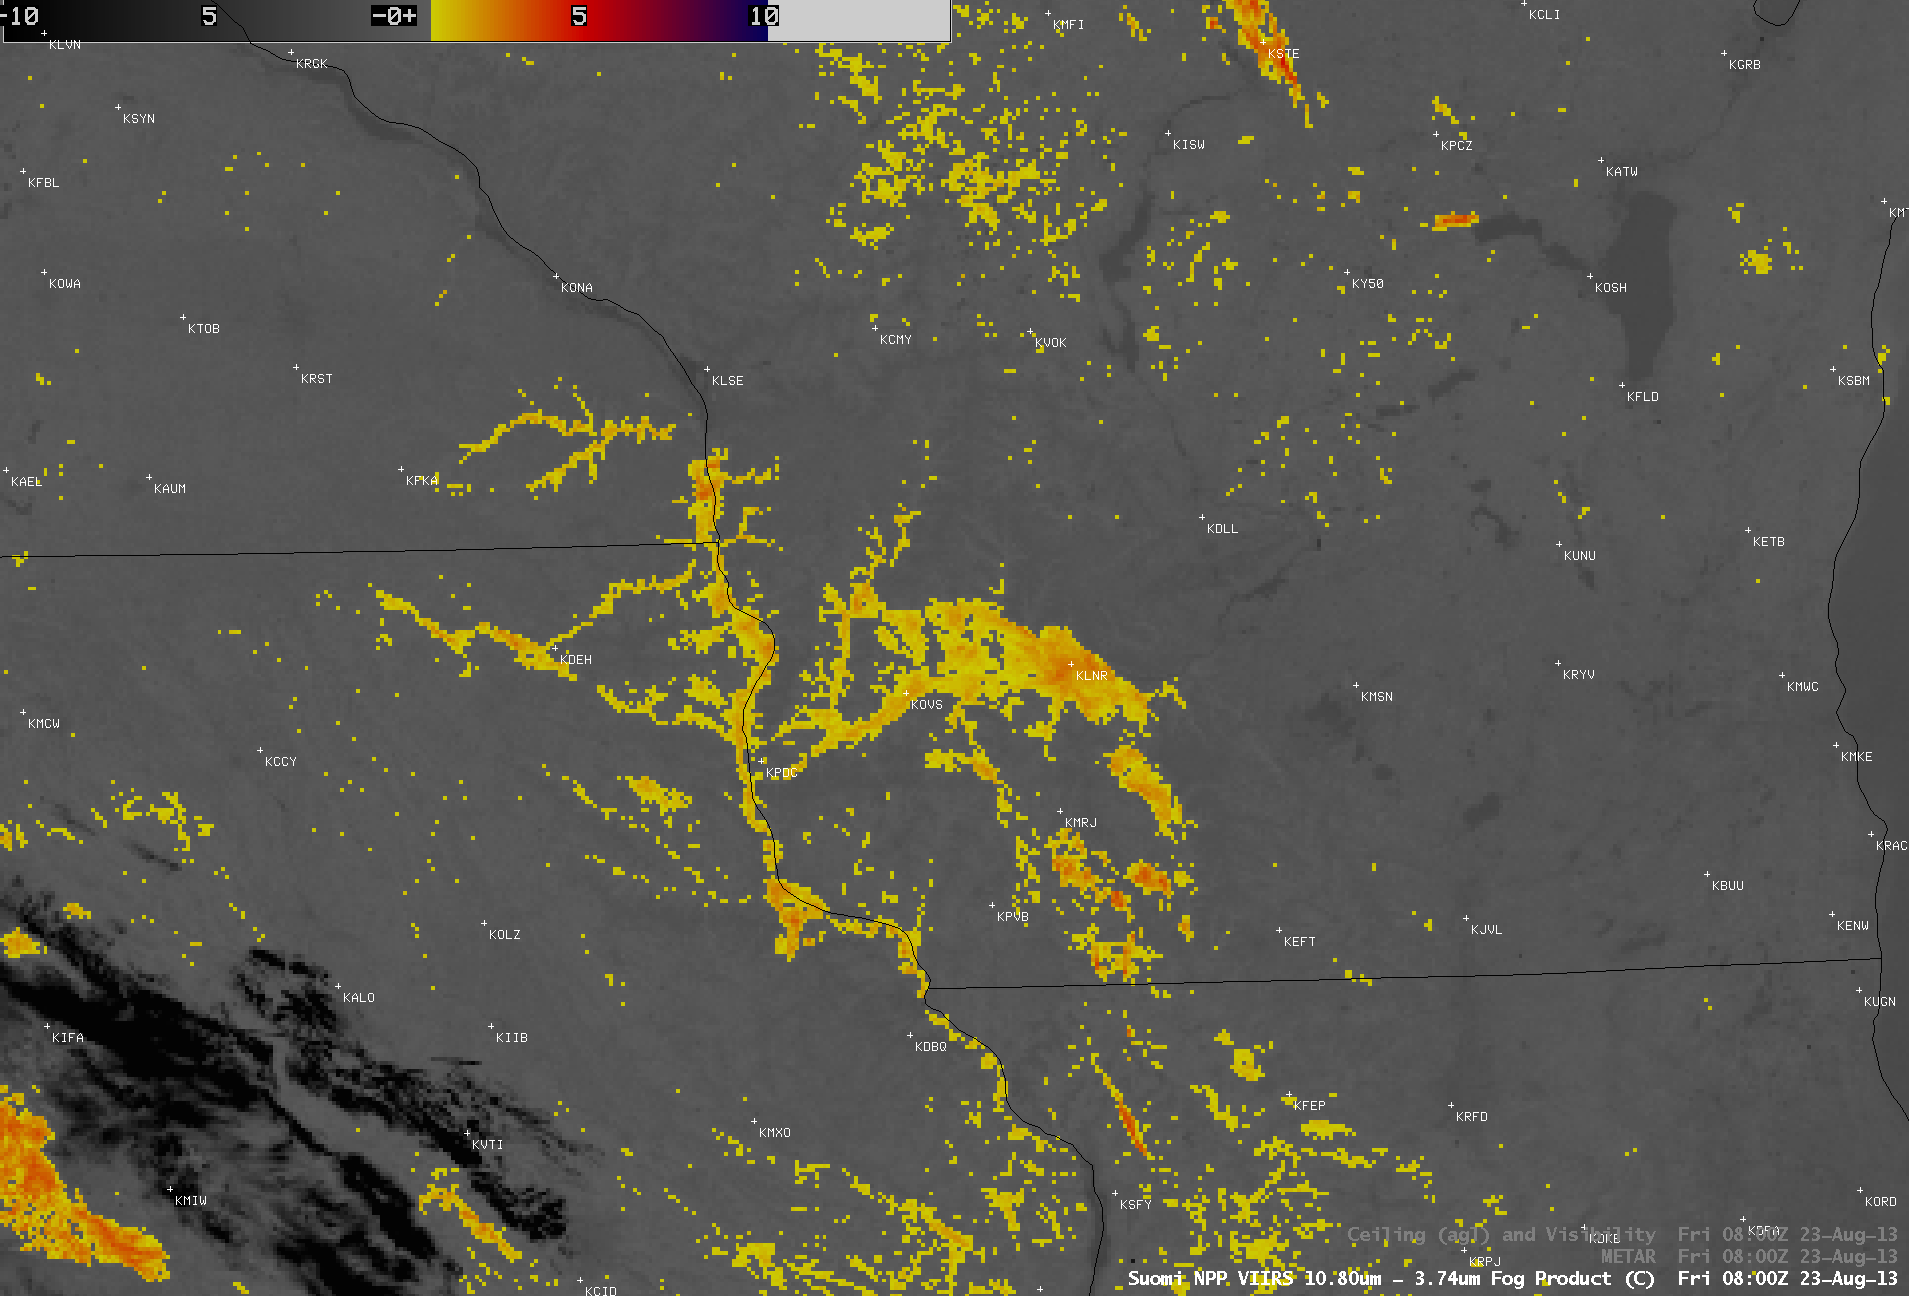 Suomi NPP VIIRS and GOES-13 IR brightness temperature difference "Fog/stratus product" images